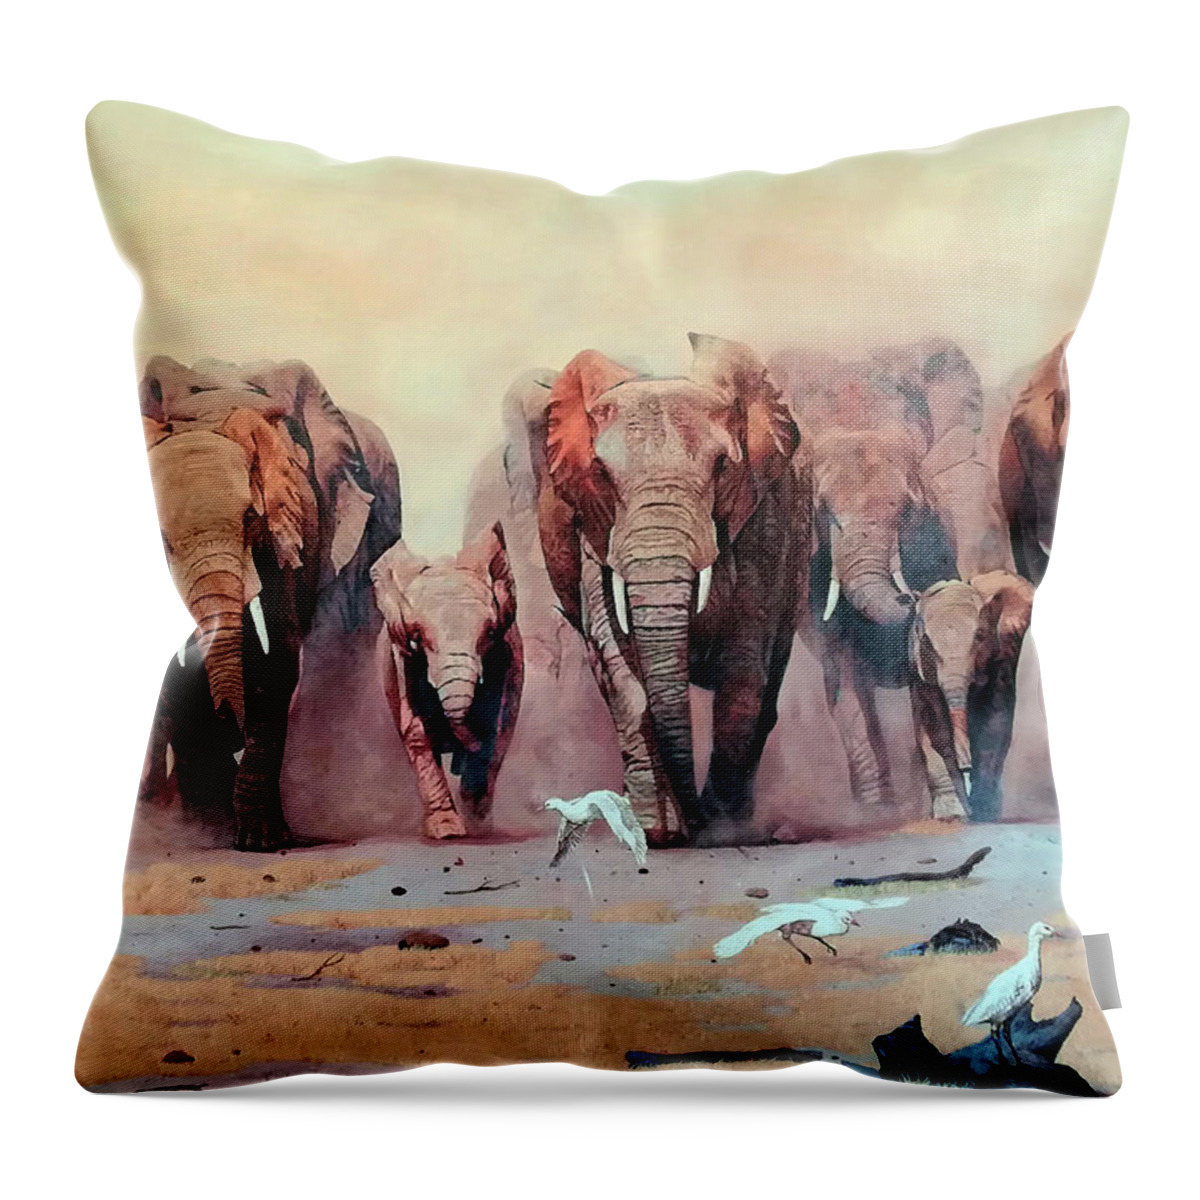 Africa Throw Pillow featuring the painting African Family Avante by Ronnie Moyo